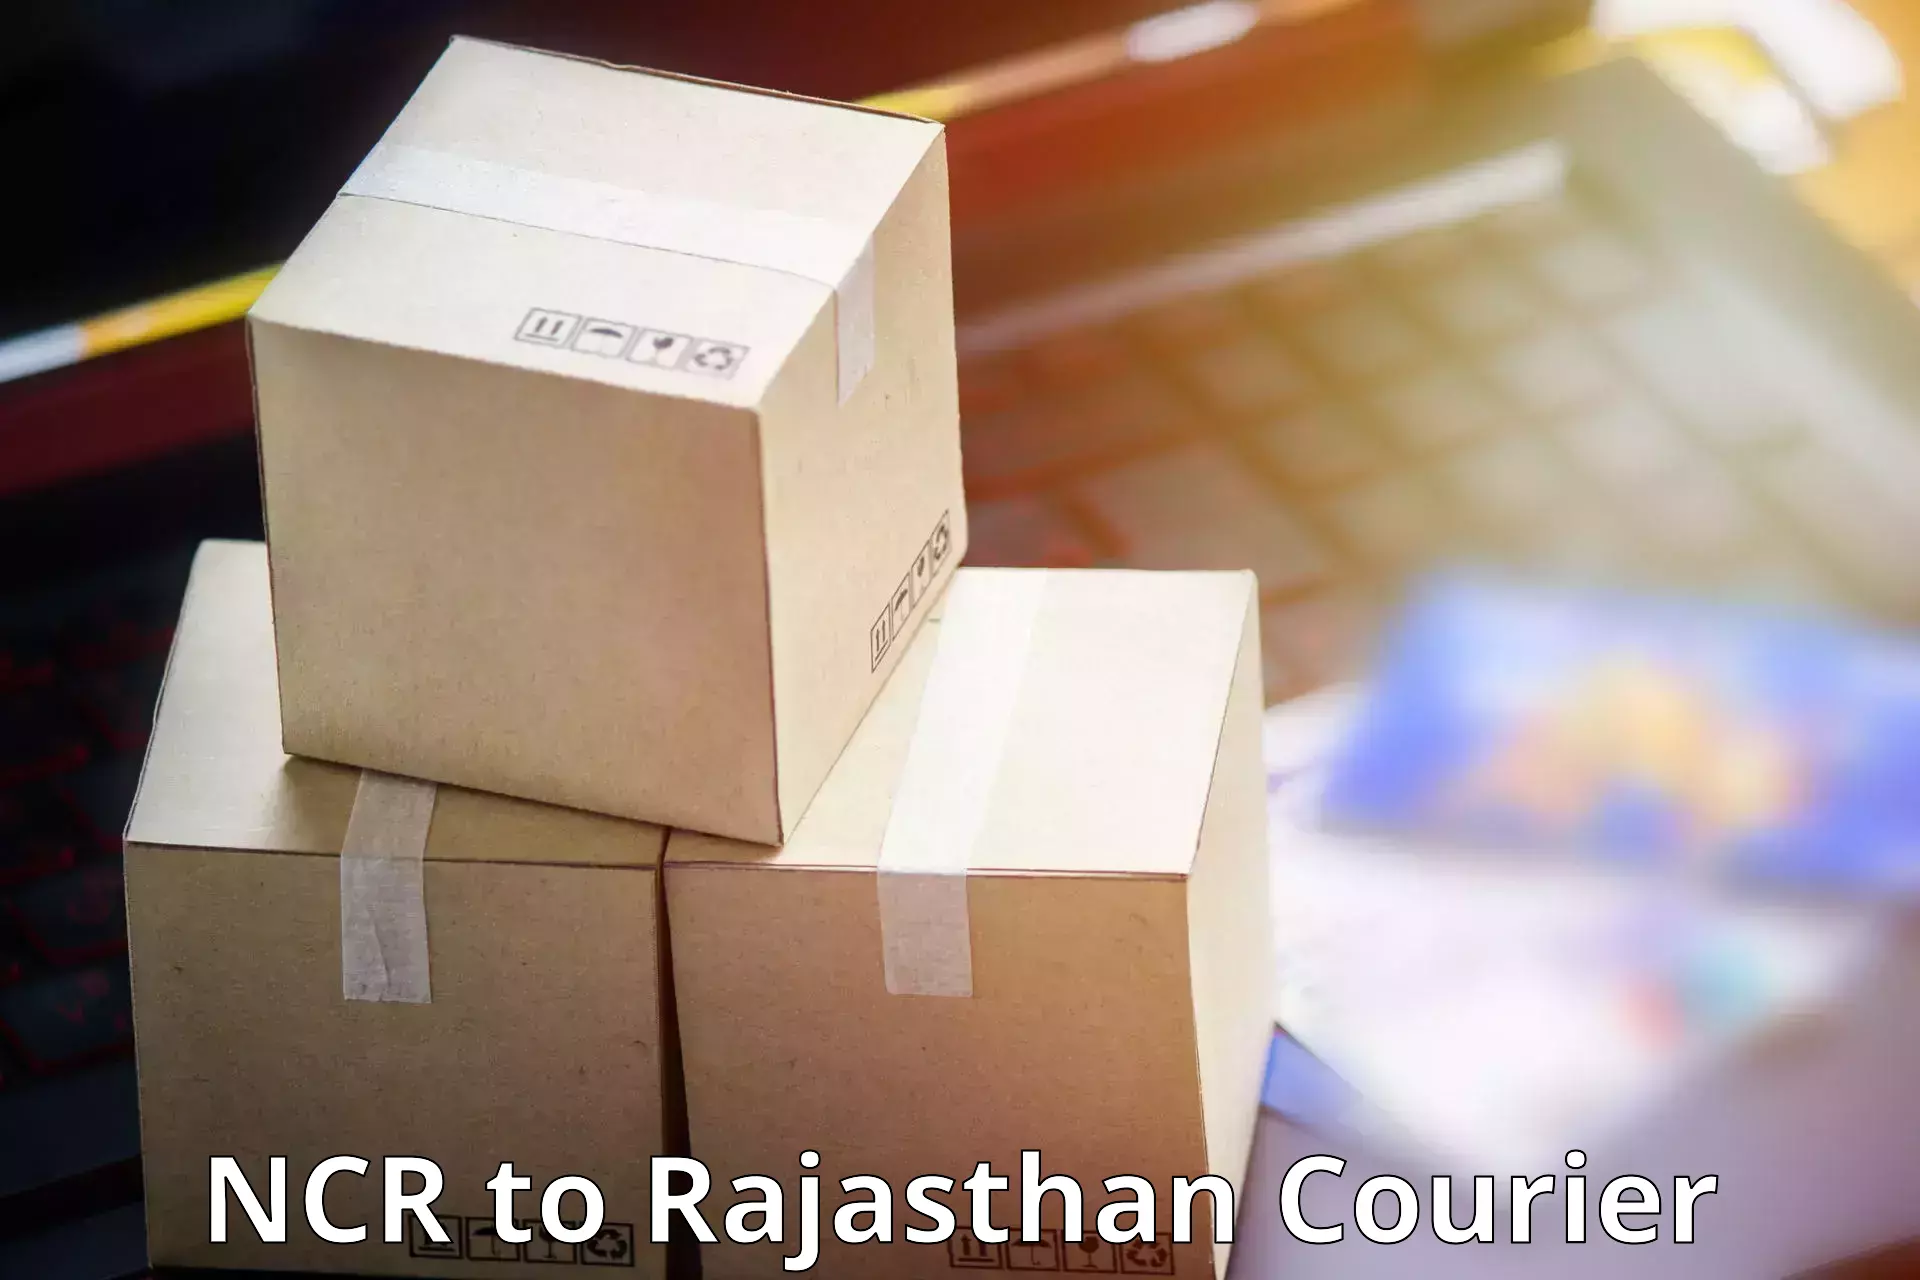 Professional courier handling NCR to Rajsamand